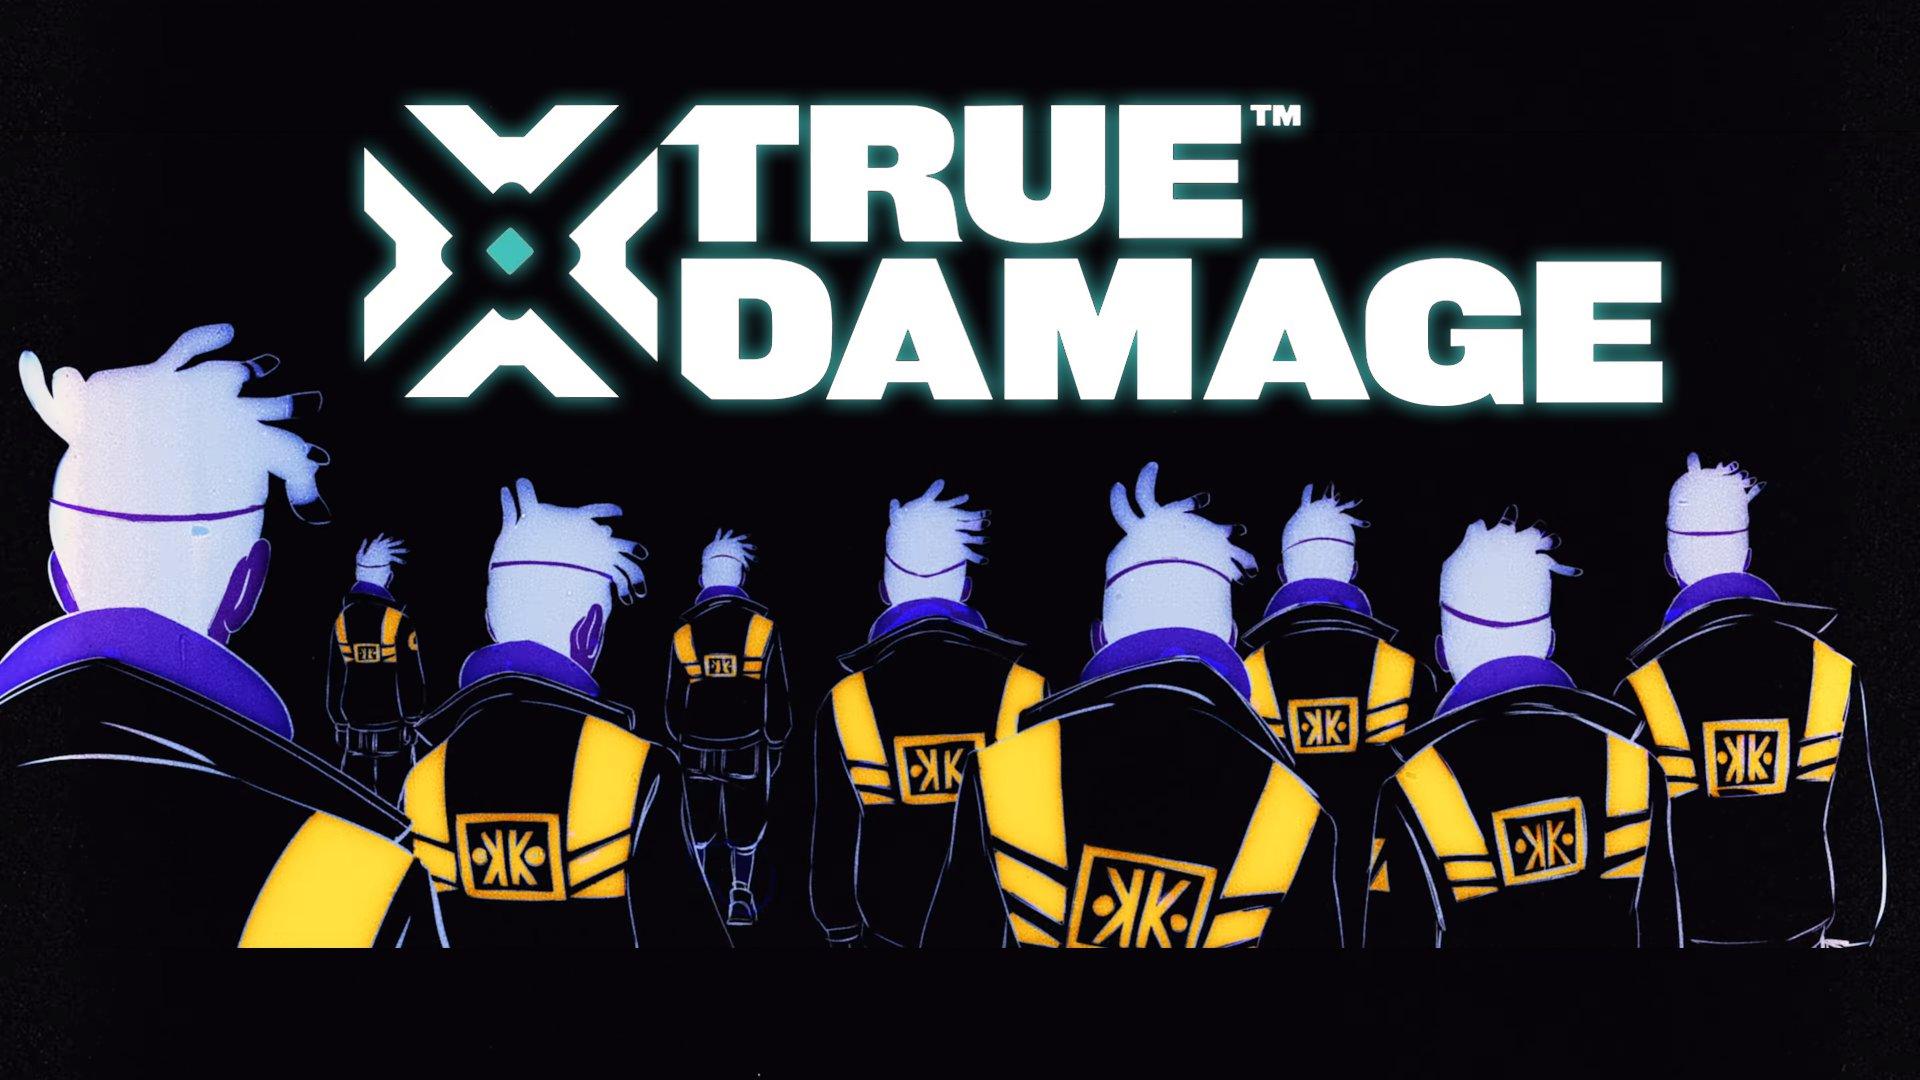 True Damage Giants Wallpapers Wallpaper Cave Images, Photos, Reviews